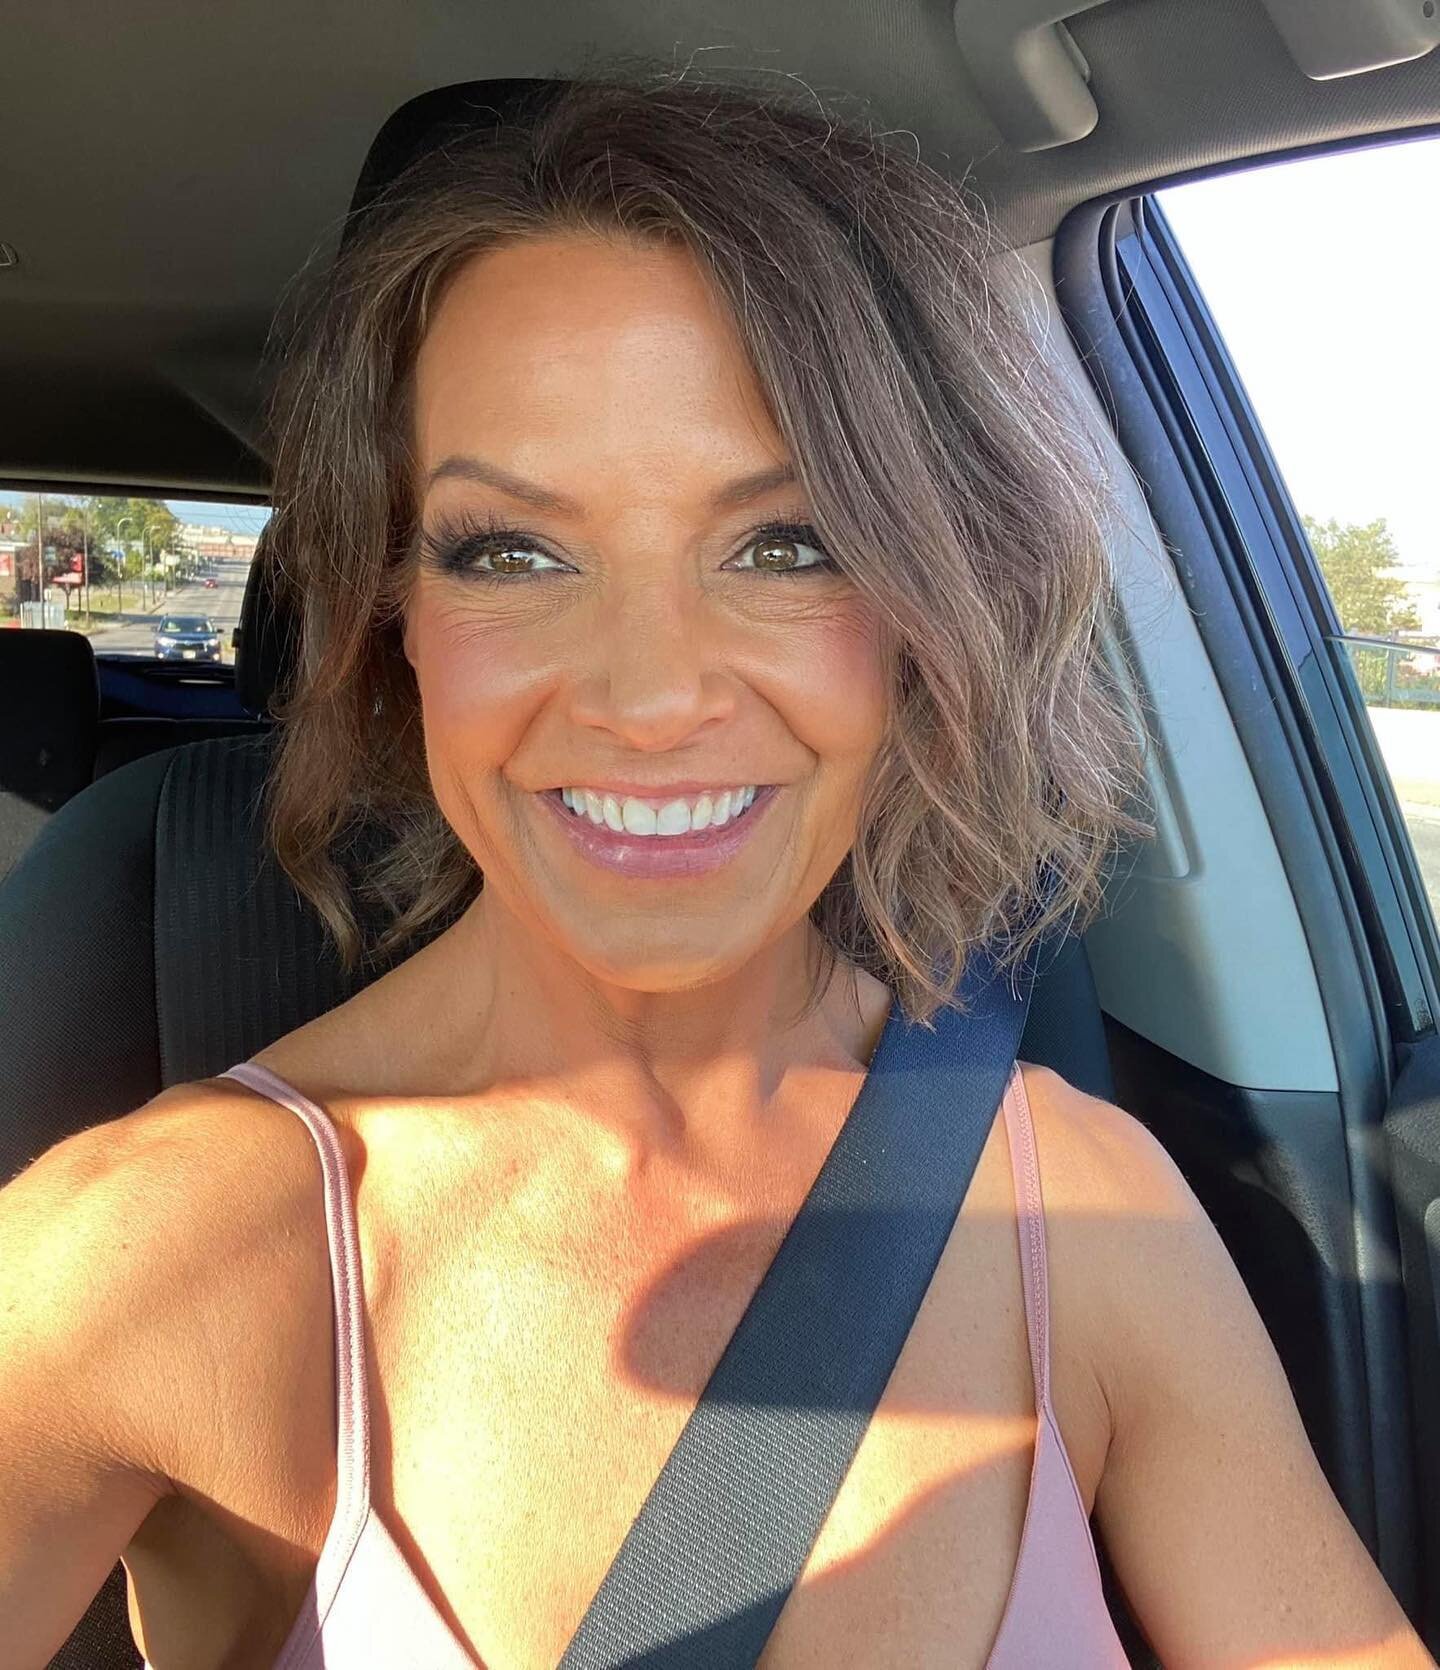 People who stay in their car to listen to the rest of the song are my kind of people 

#selfie #selfiesaturday #instagood #love #smile #grateful #gratitude #thankful #thankyou #photooftheday #picoftheday #model #personaltrainer #fitover50 #fitoverfif